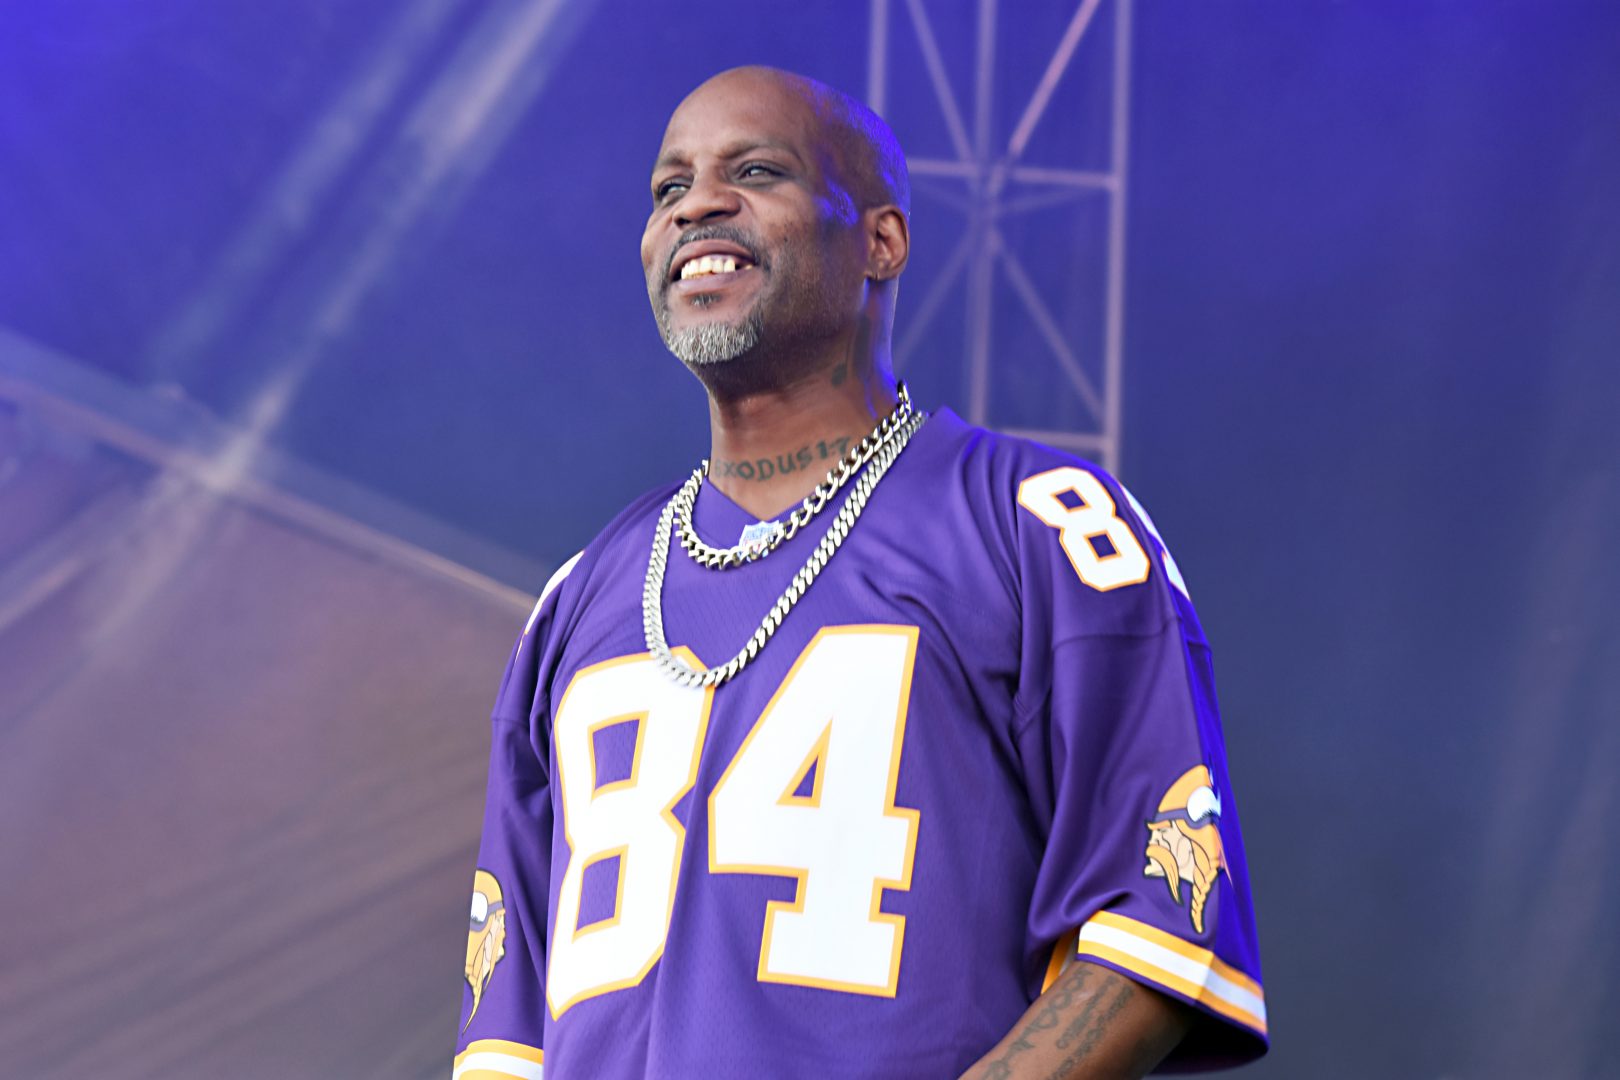 Award-winning rapper and actor DMX has died at 50